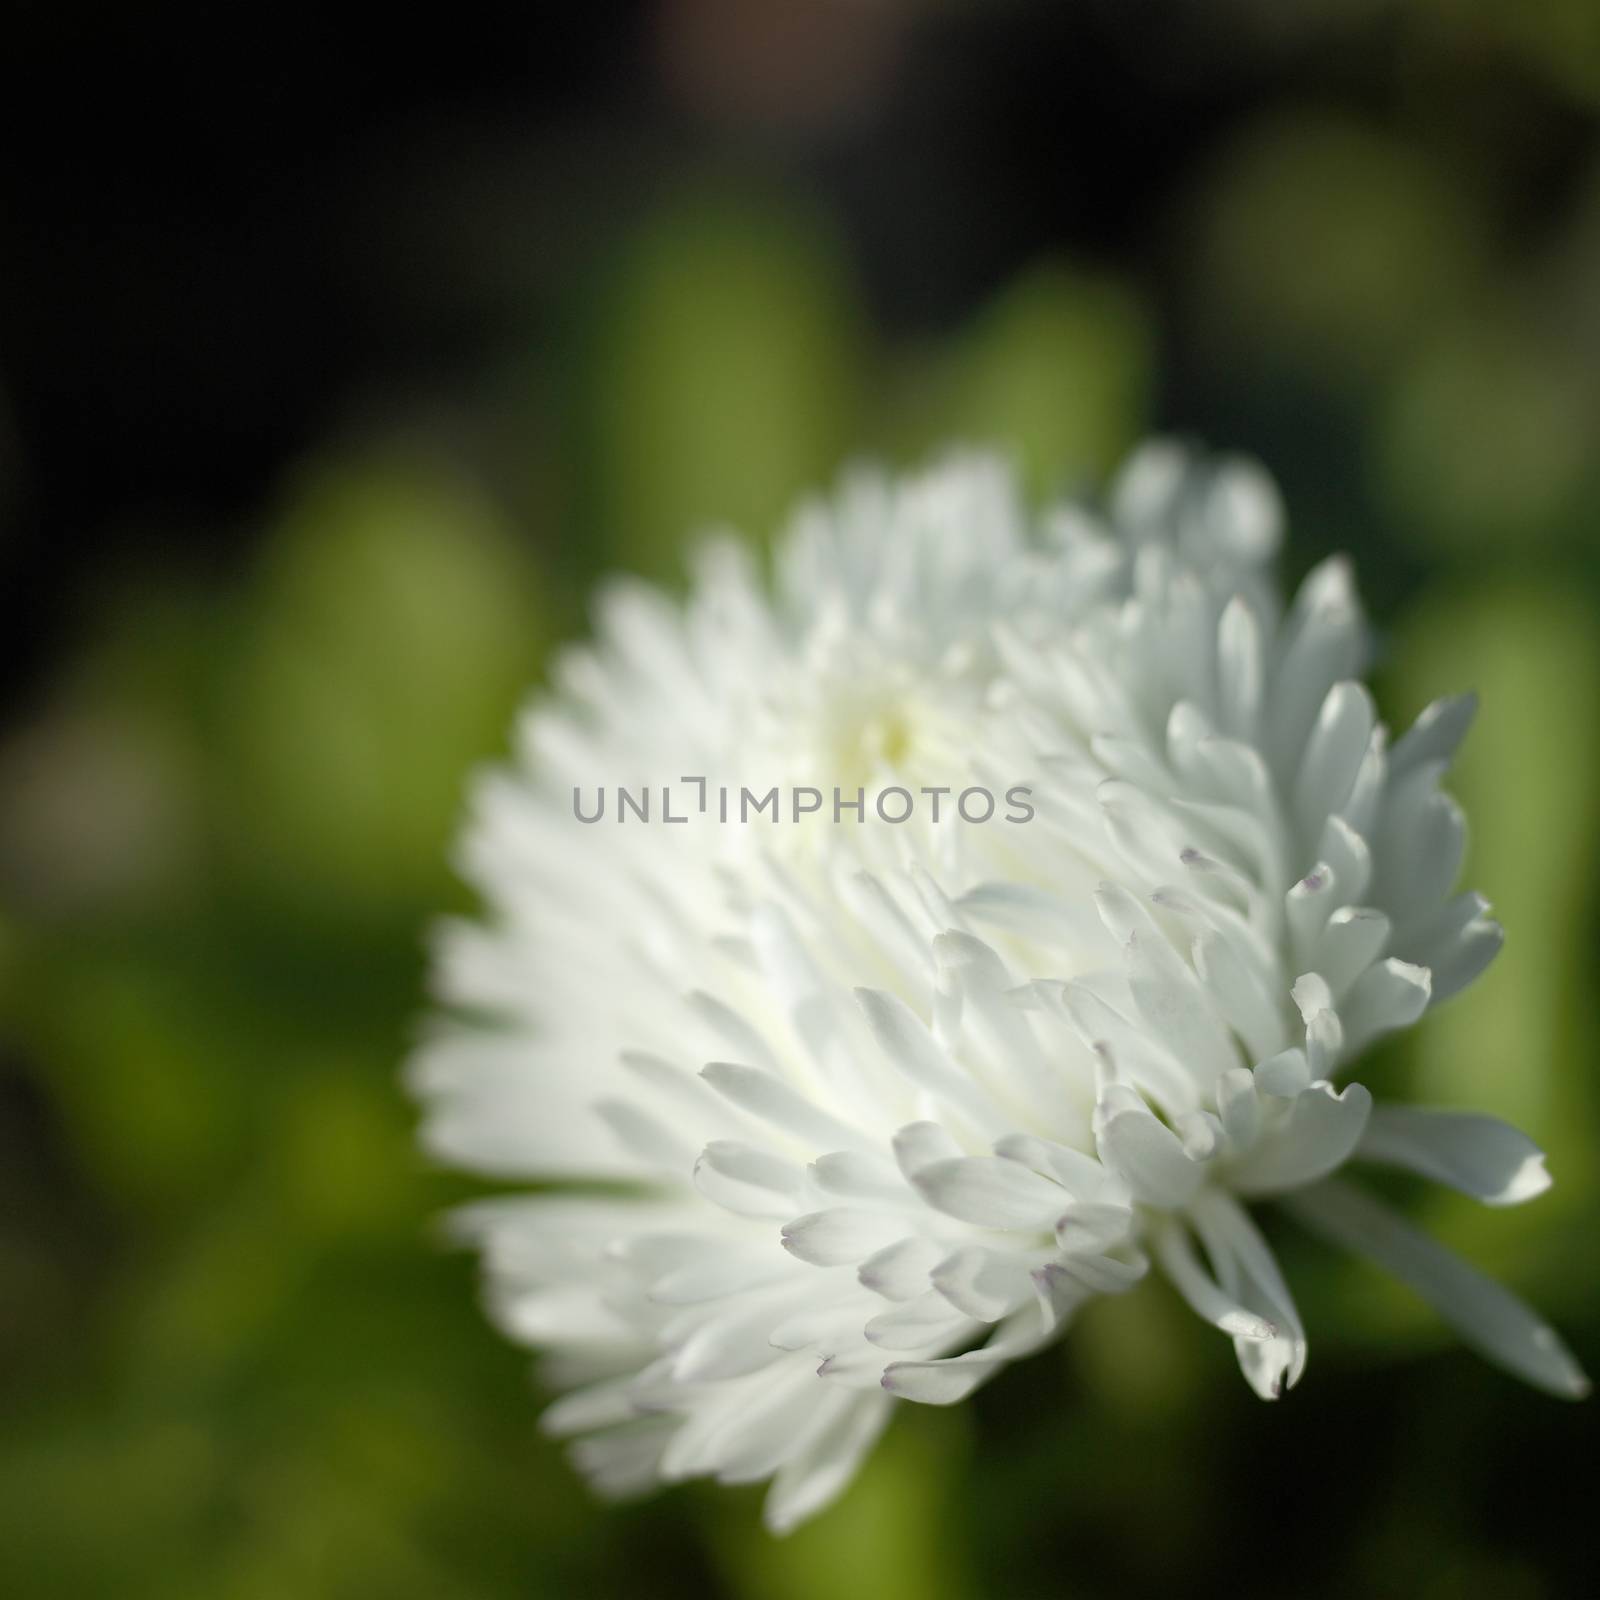 Tiny soft white petals of an English daisy flower in full bloom 